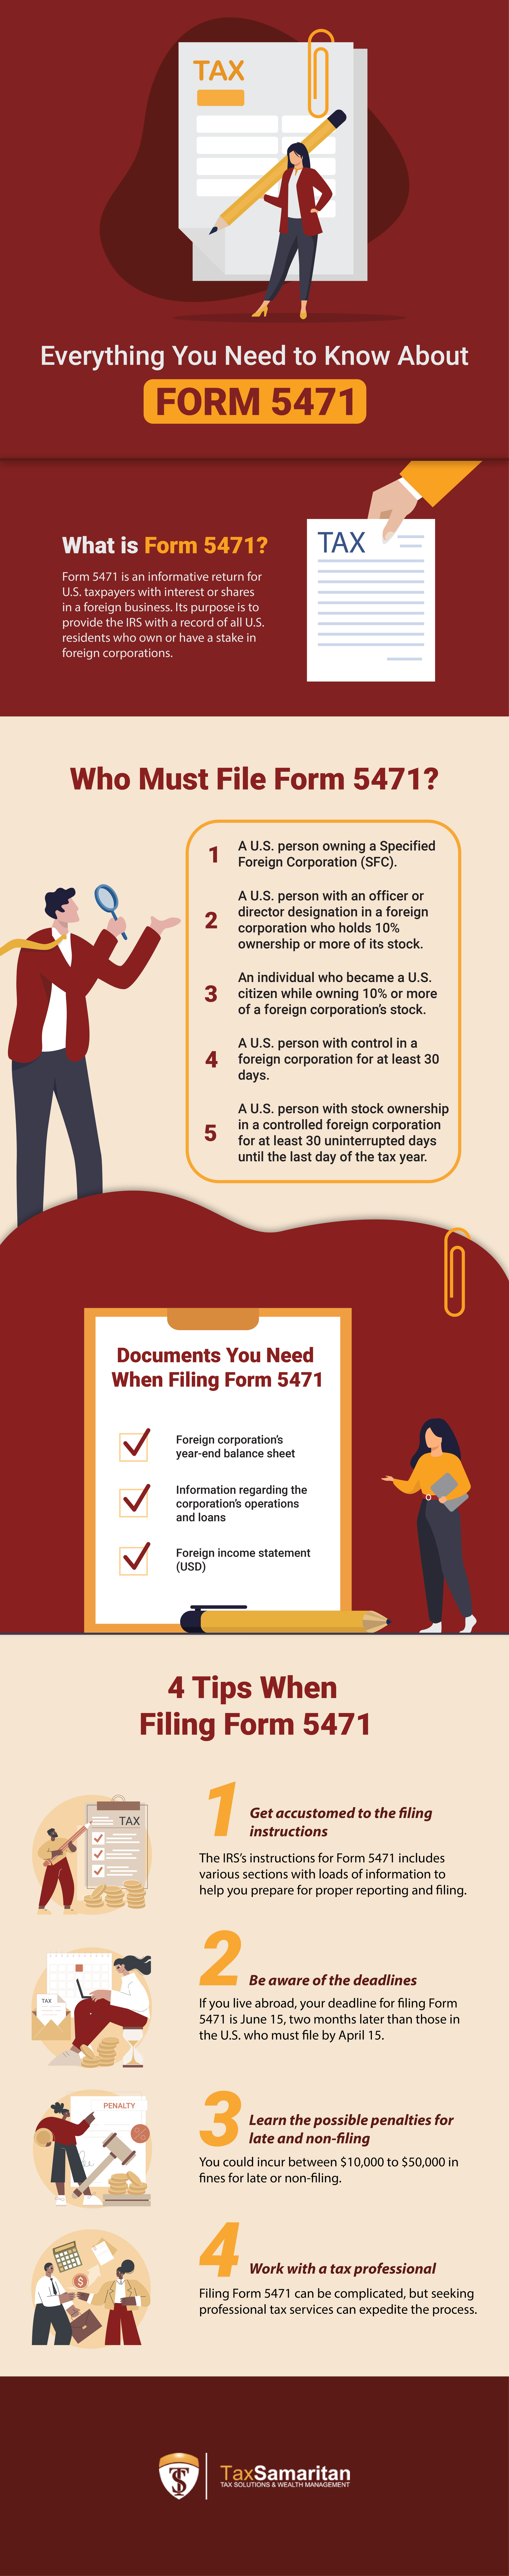 Everything You Need to Know About Form 5471